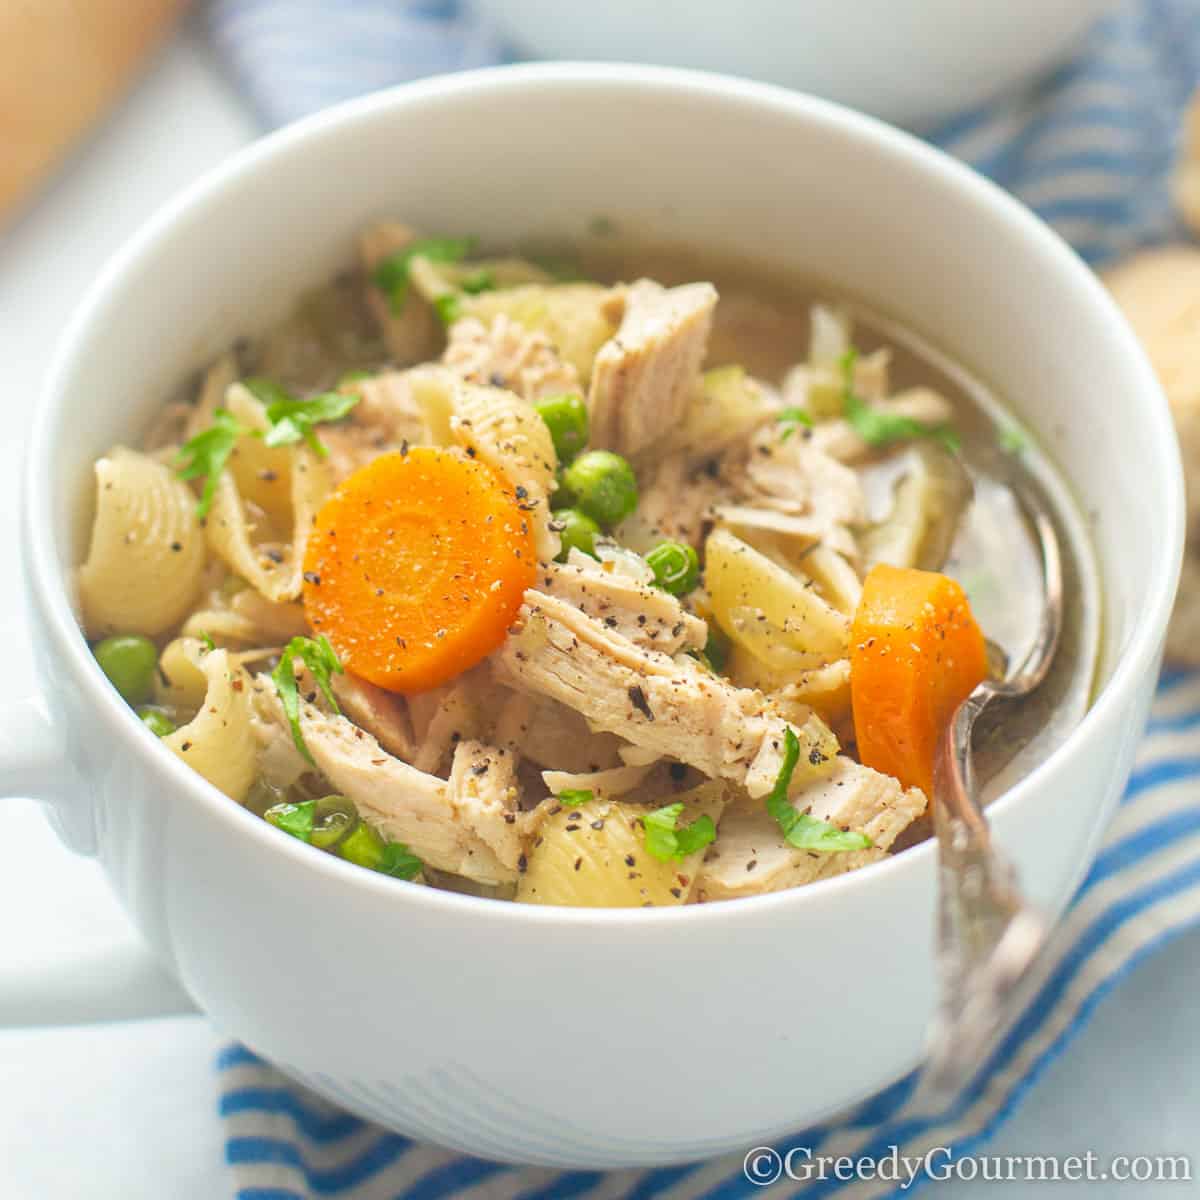 Top Tips for Storing leftover Soup ⋆ NellieBellie